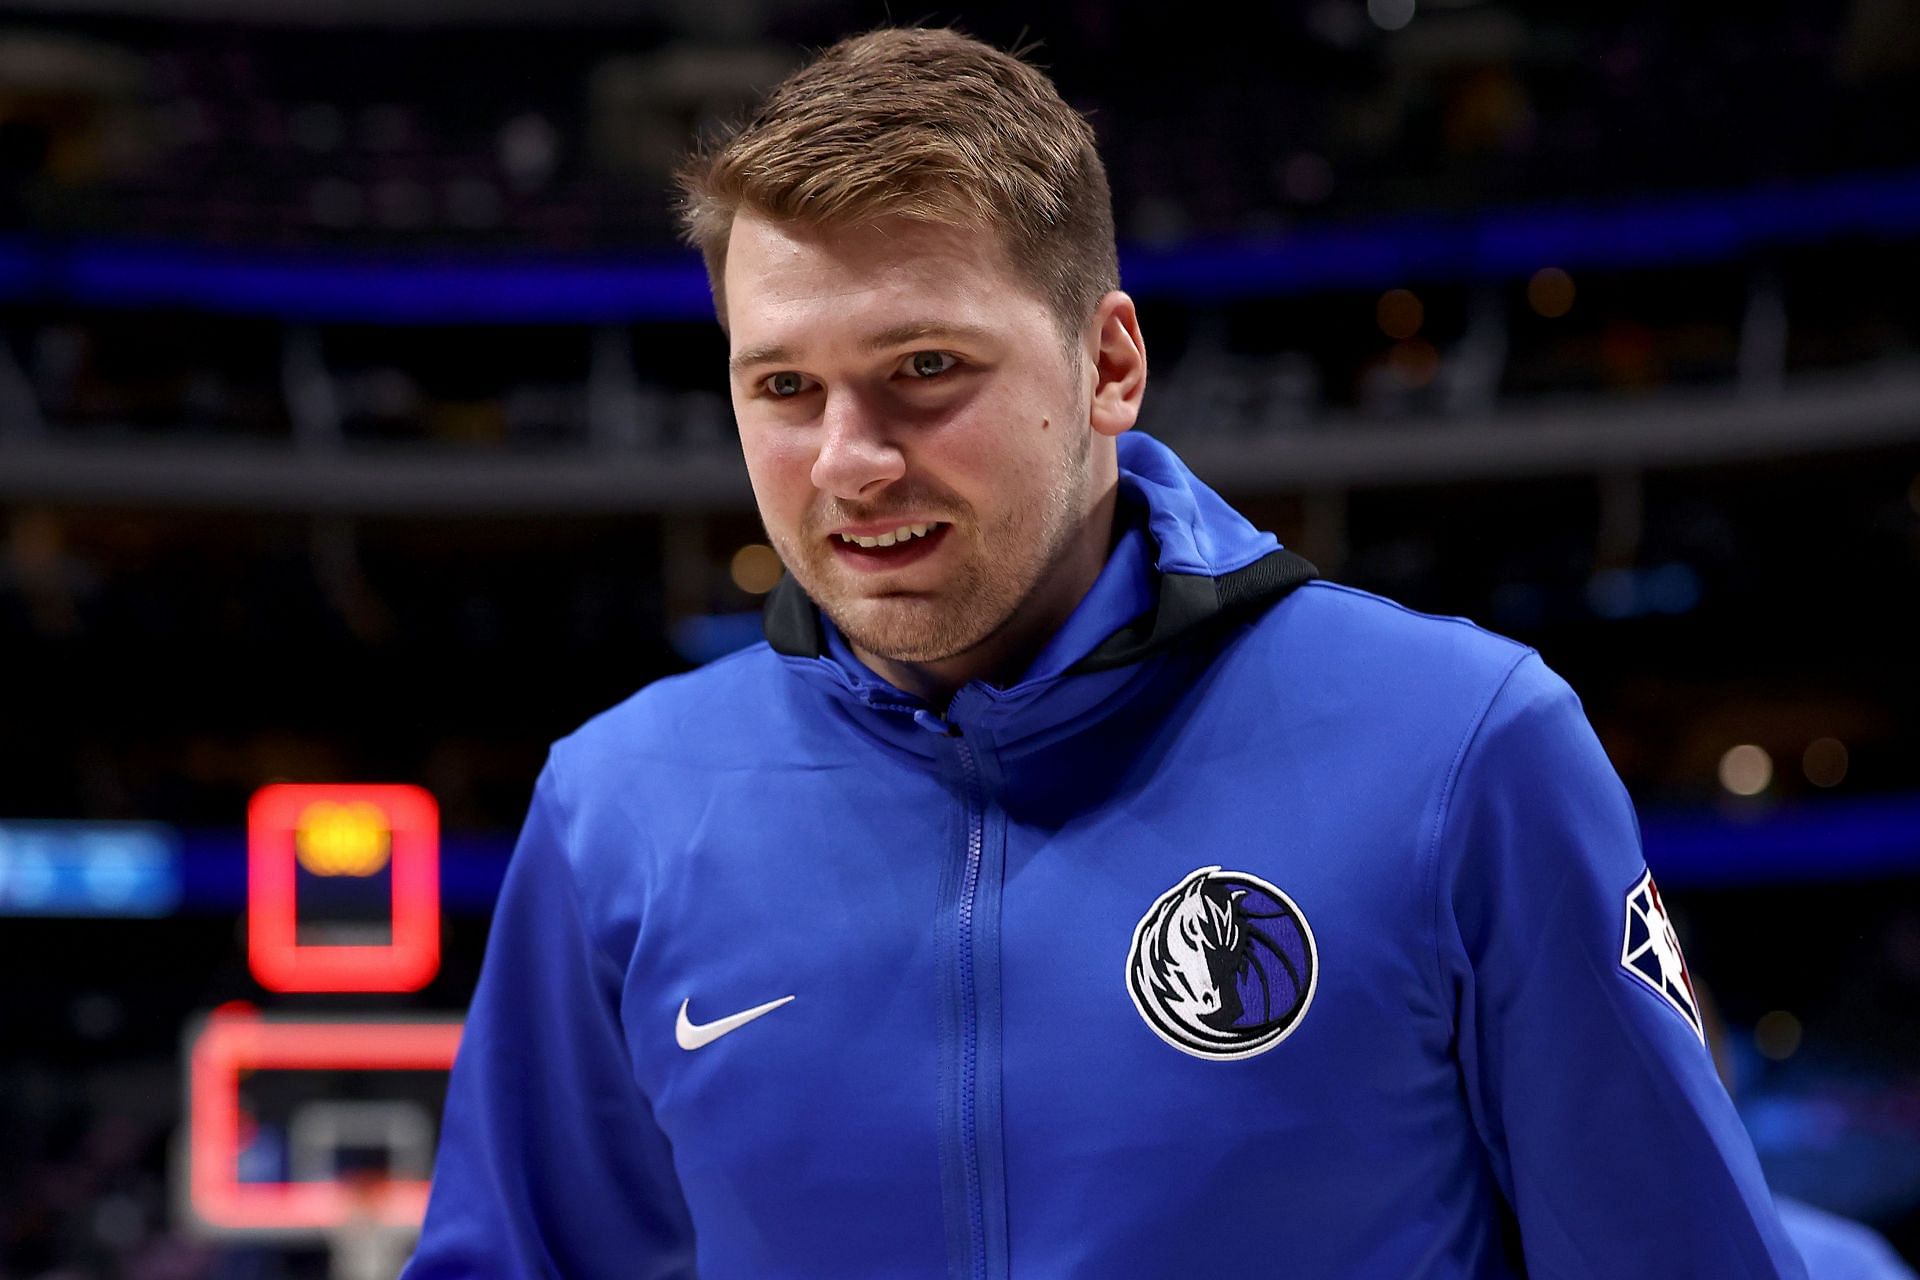 Luka Doncic will look to become the MVP this year.